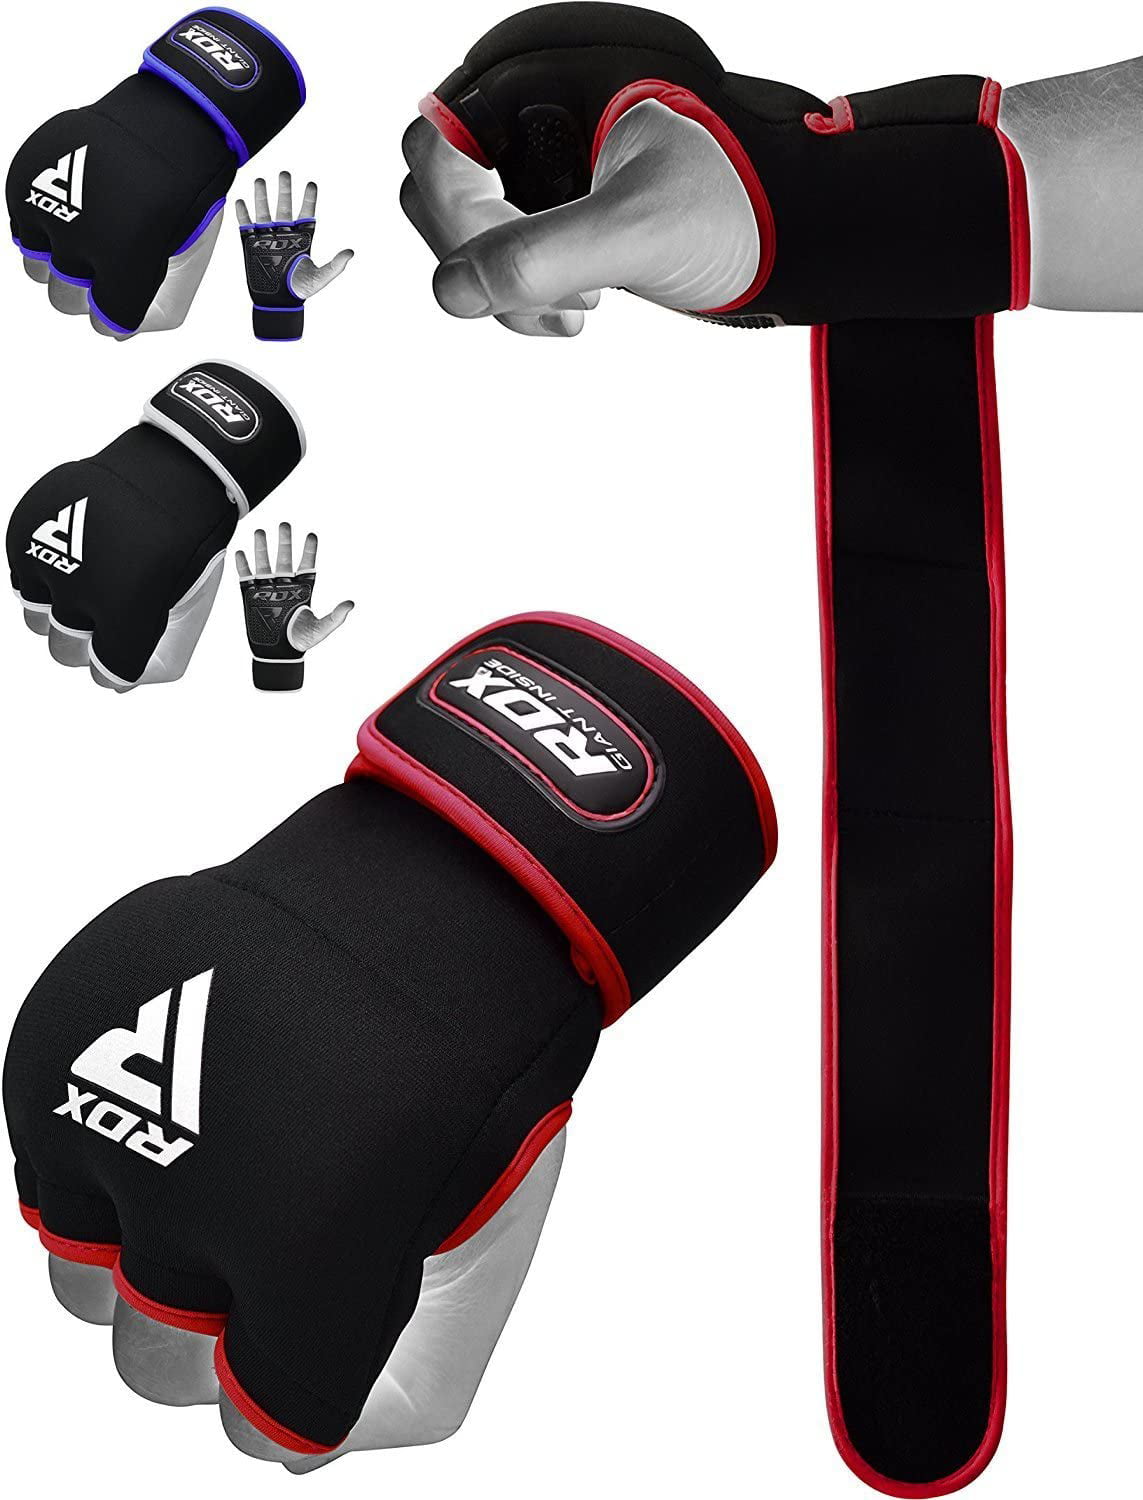 New Fist Gel Bandages MMA boxing Inner Quick Hand Wraps Gloves straps Black SZ.. 